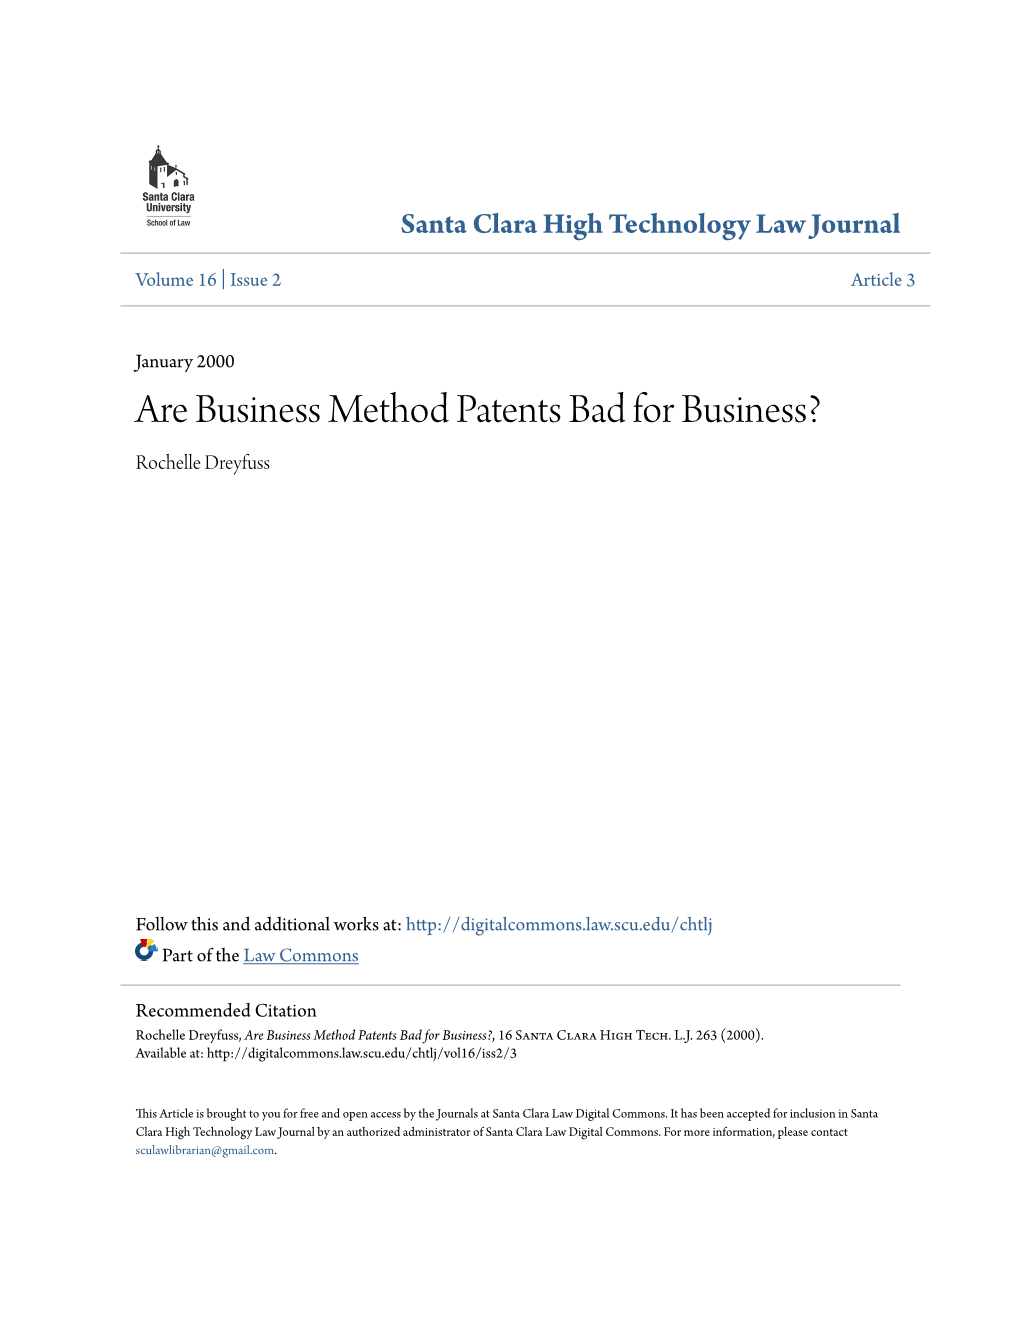 Are Business Method Patents Bad for Business? Rochelle Dreyfuss